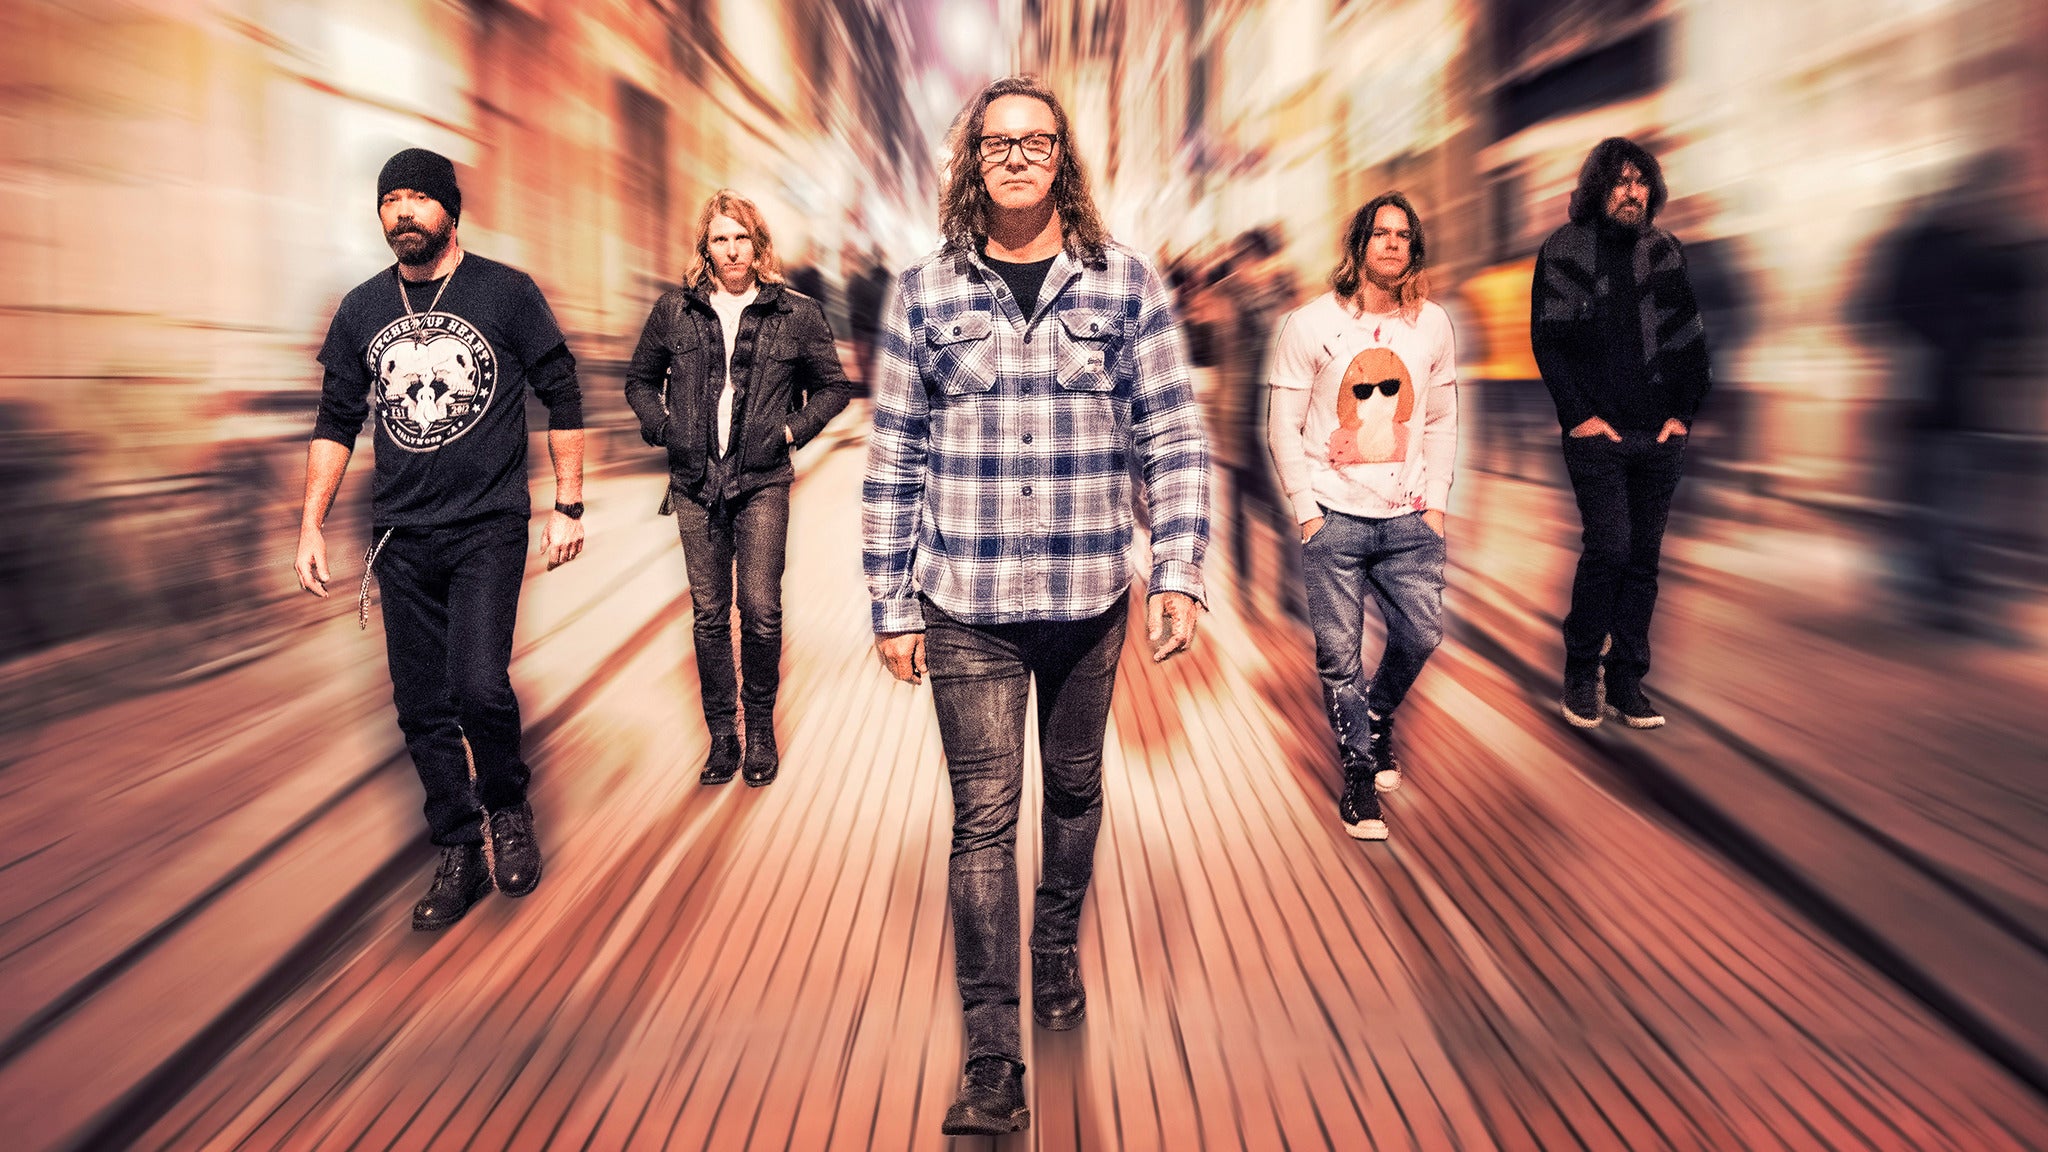 Candlebox - Wolves Tour 2022